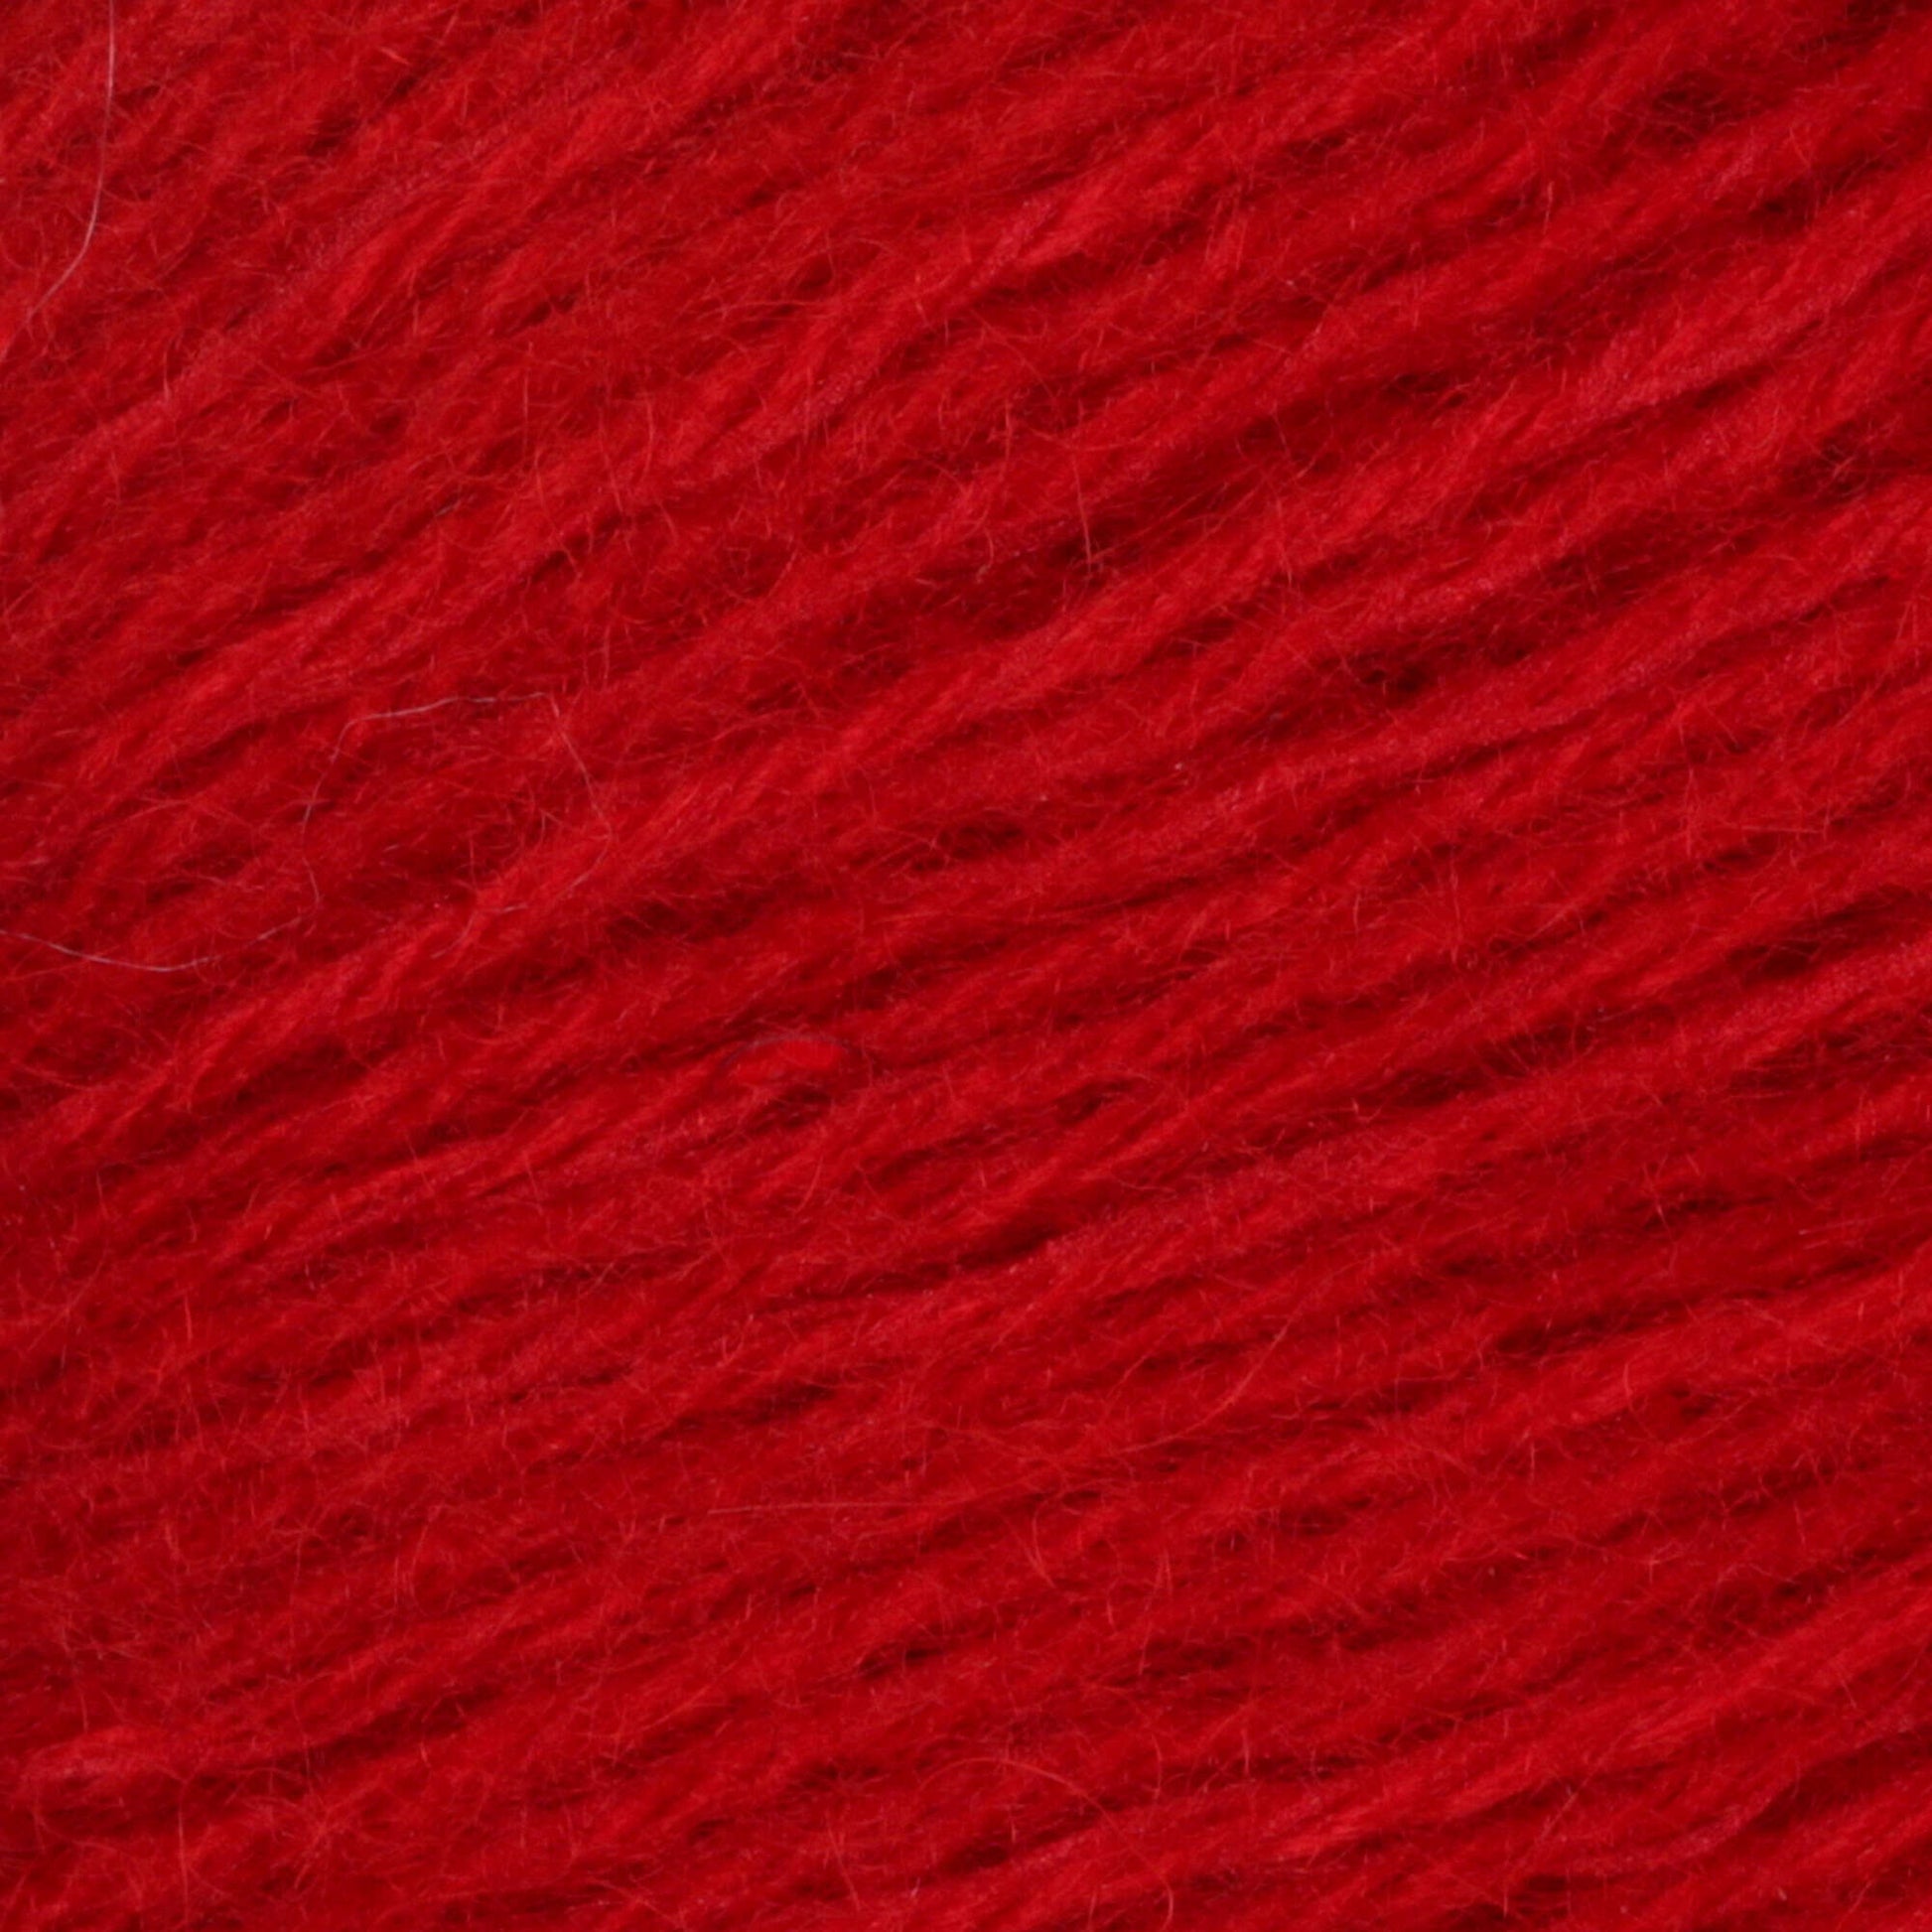 Patons Lace Sequin Yarn - Discontinued